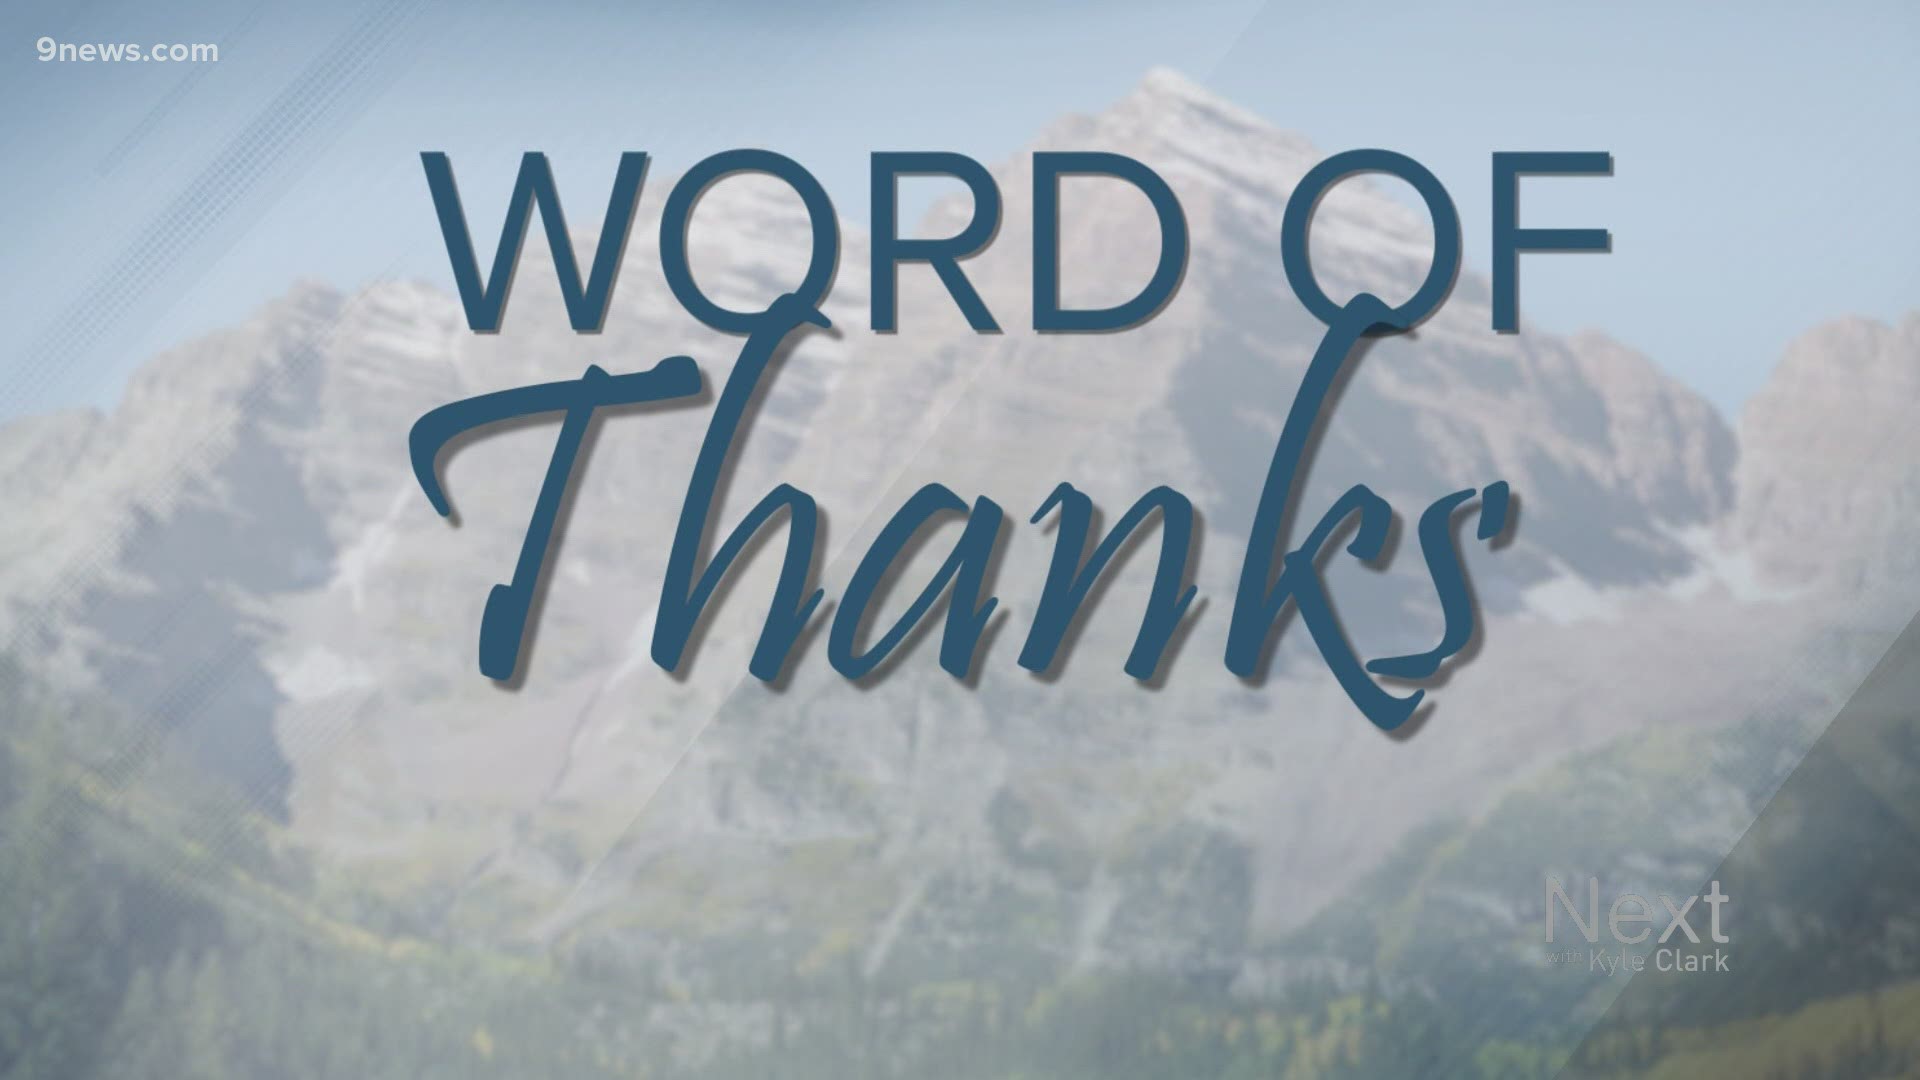 Our Word of Thanks campaign helps Colorado nonprofits. This week we want to support The Second Wind Fund. It finds fast help young people who at risk for suicide.